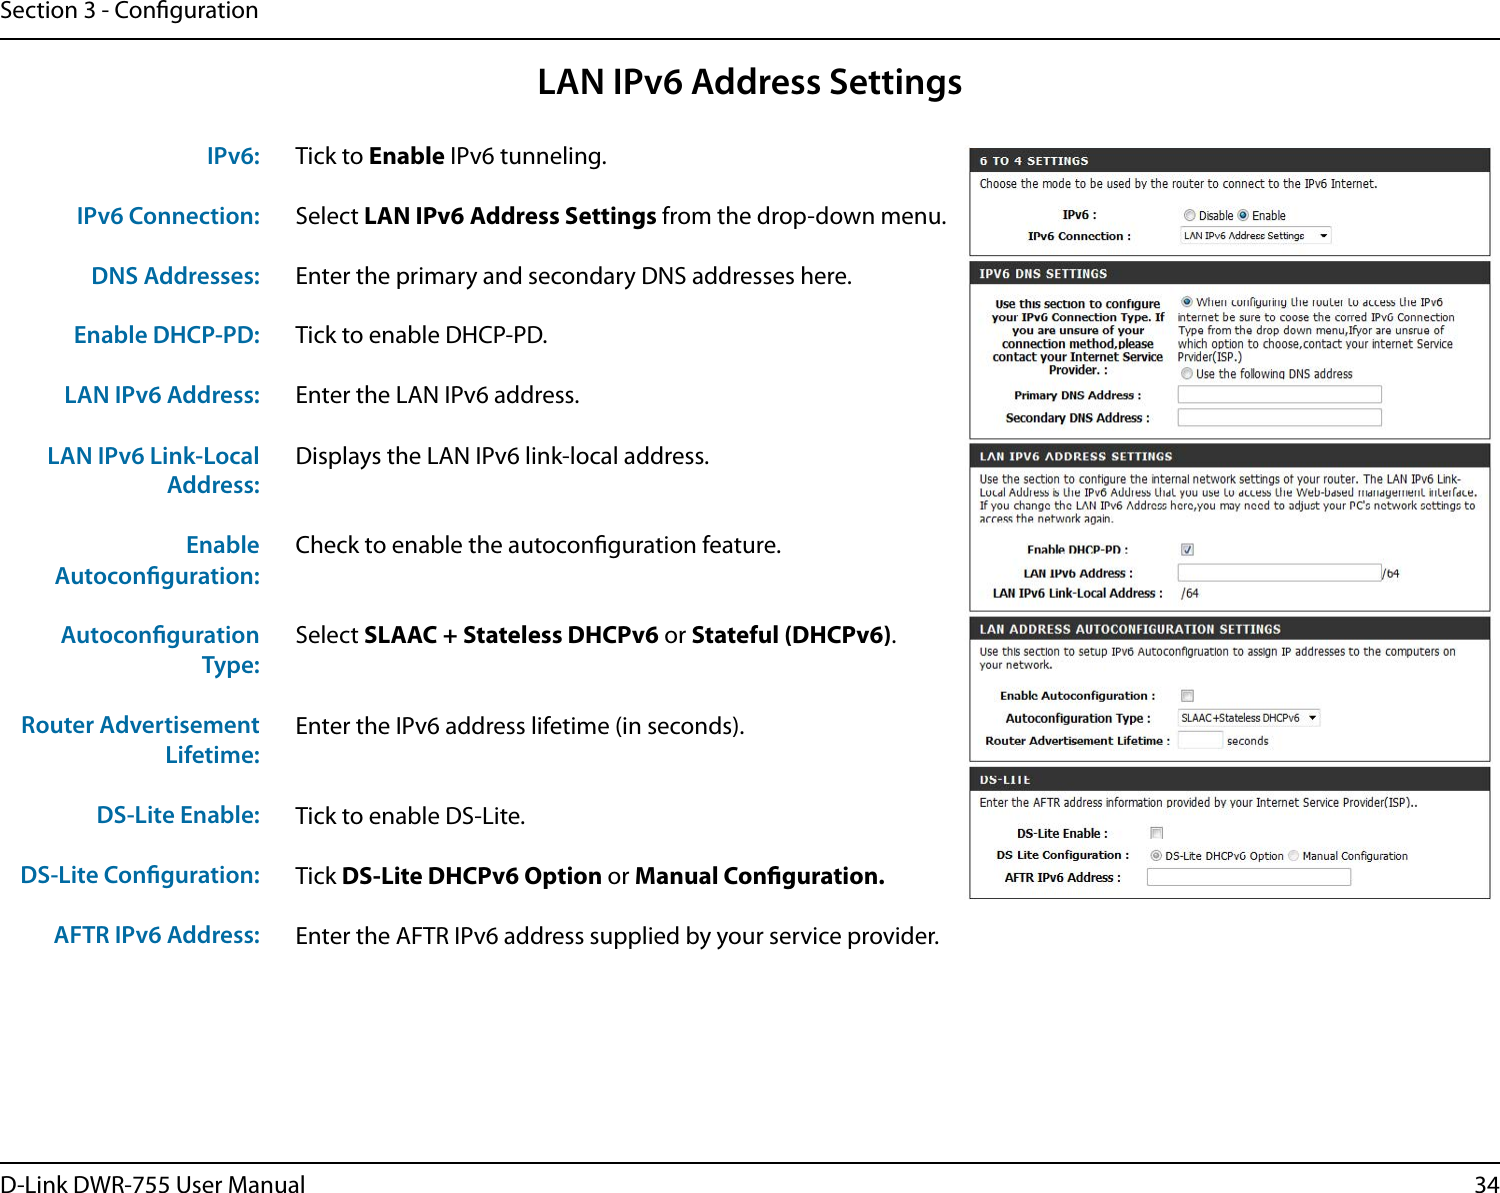 34D-Link DWR-755 User ManualSection 3 - CongurationLAN IPv6 Address SettingsTick to Enable IPv6 tunneling.Select LAN IPv6 Address Settings from the drop-down menu.Enter the primary and secondary DNS addresses here.Tick to enable DHCP-PD.Enter the LAN IPv6 address.Displays the LAN IPv6 link-local address.Check to enable the autoconguration feature.Select SLAAC + Stateless DHCPv6 or Stateful (DHCPv6).Enter the IPv6 address lifetime (in seconds).Tick to enable DS-Lite.Tick DS-Lite DHCPv6 Option or Manual Conguration.Enter the AFTR IPv6 address supplied by your service provider.IPv6:IPv6 Connection:DNS Addresses:Enable DHCP-PD:LAN IPv6 Address:LAN IPv6 Link-Local Address:Enable Autoconguration:Autoconguration Type:Router Advertisement Lifetime:DS-Lite Enable:DS-Lite Conguration:AFTR IPv6 Address: